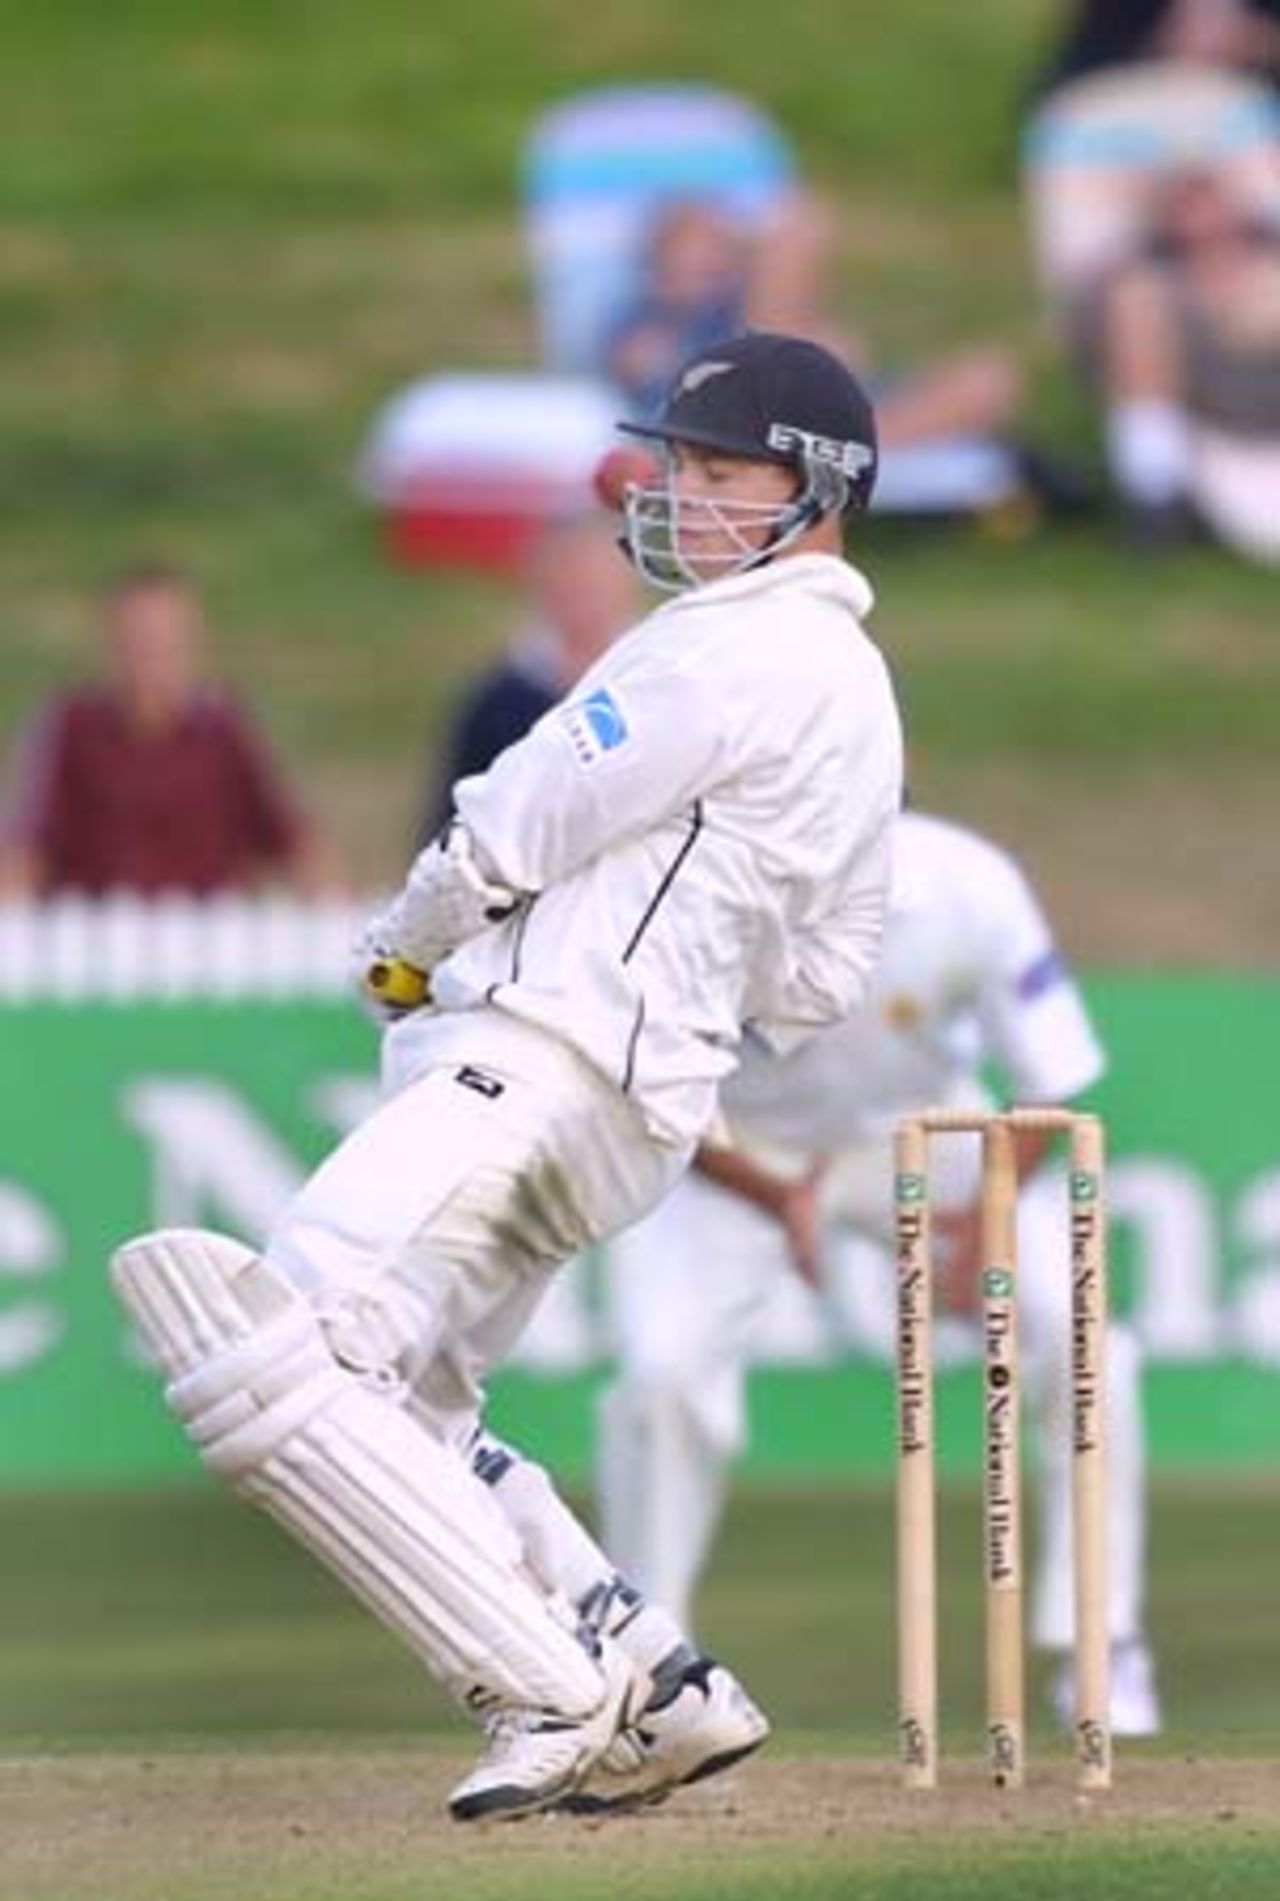 New Zealand opening batsman Matthew Bell sways back out of the way of a bouncer outside off stump during his first innings. Bell ended the first day's play on 89 not out, his highest Test score. 3rd Test: New Zealand v Pakistan at WestpacTrust Park, Hamilton, 27-31 March 2001 (Day 1).